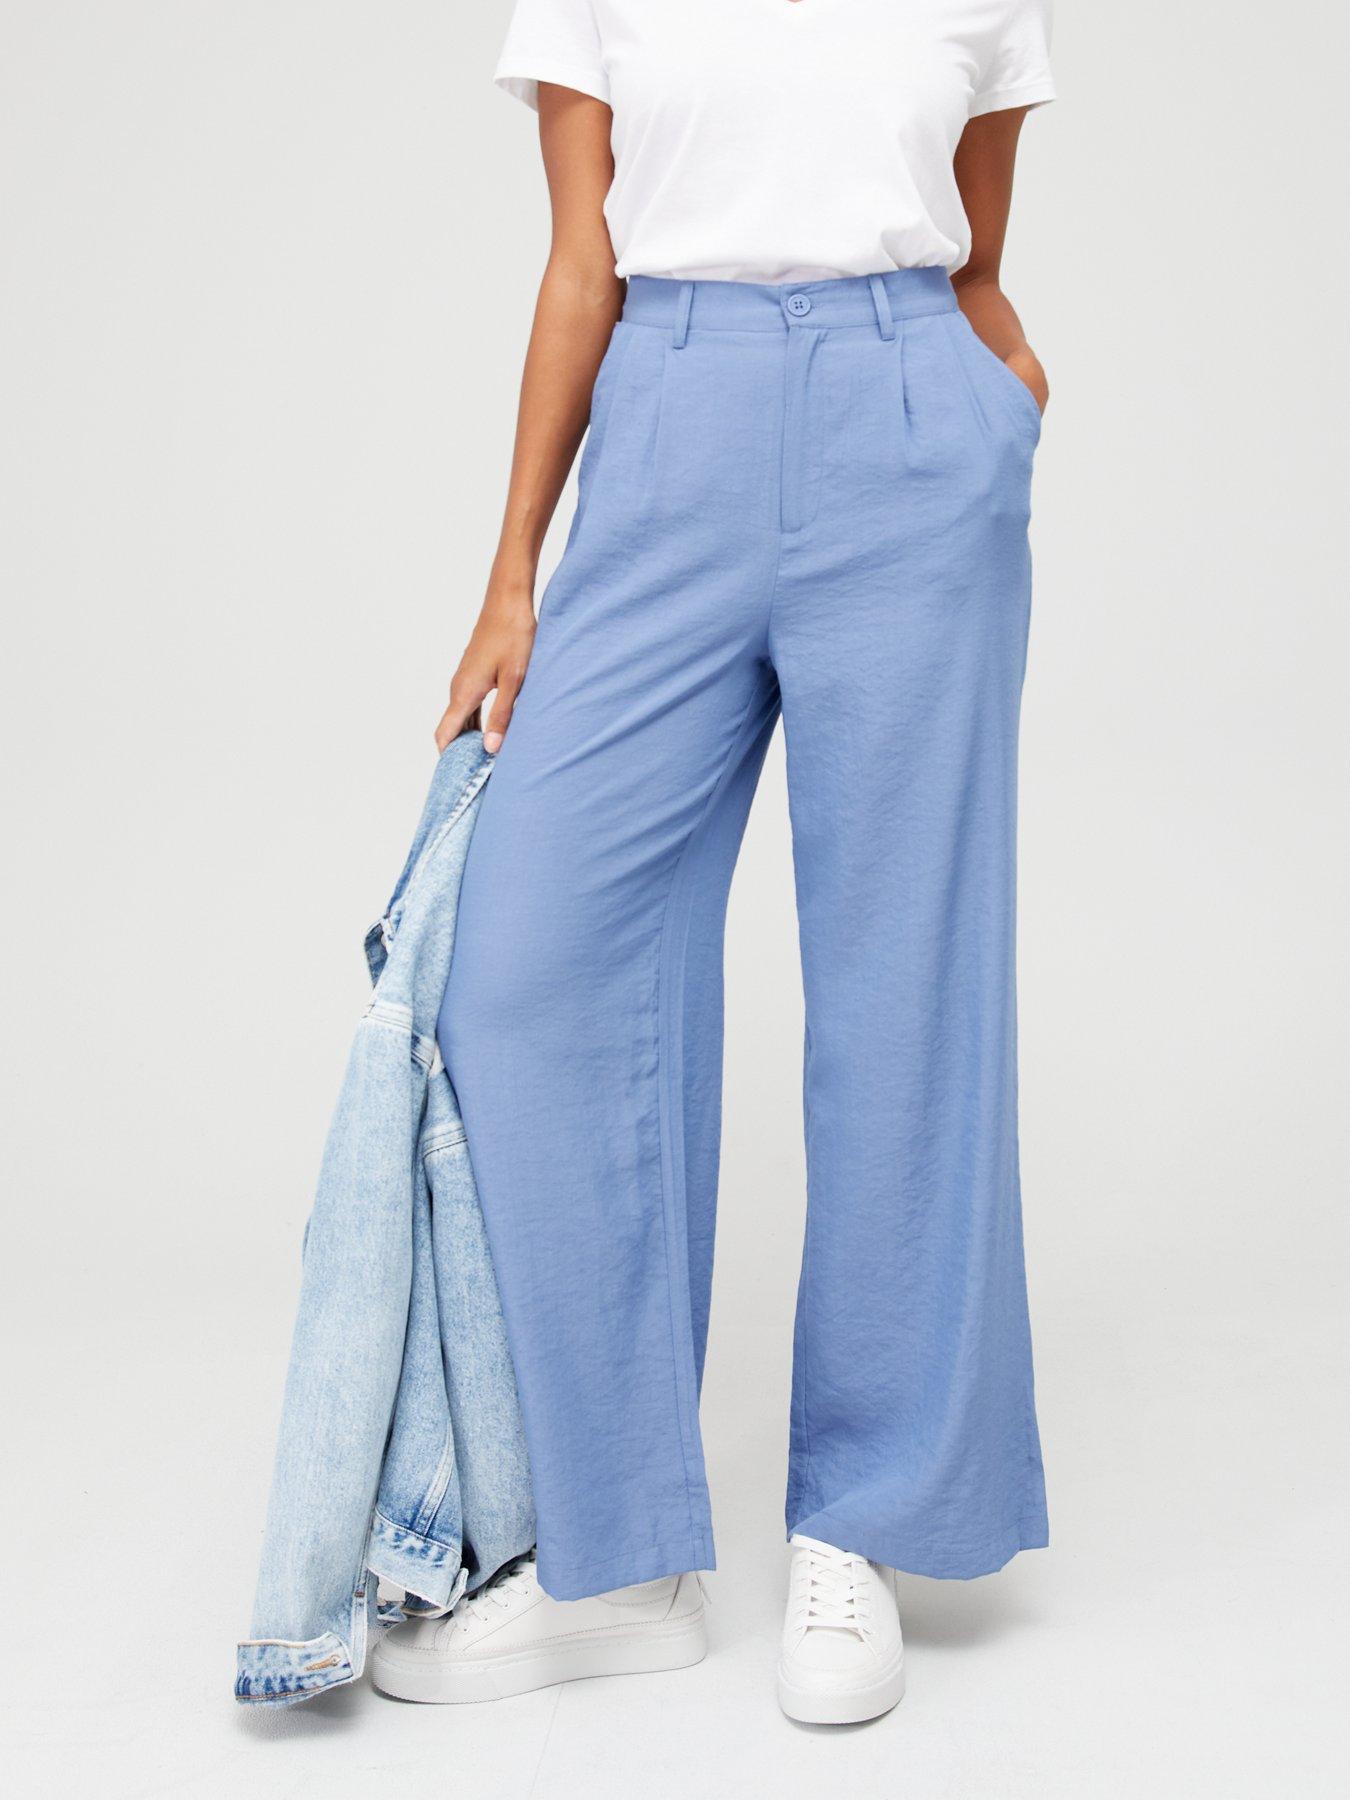 Womens Clothing Trousers Onia Printed Cotton-blend Wide-leg Pants in Blue Slacks and Chinos Wide-leg and palazzo trousers 